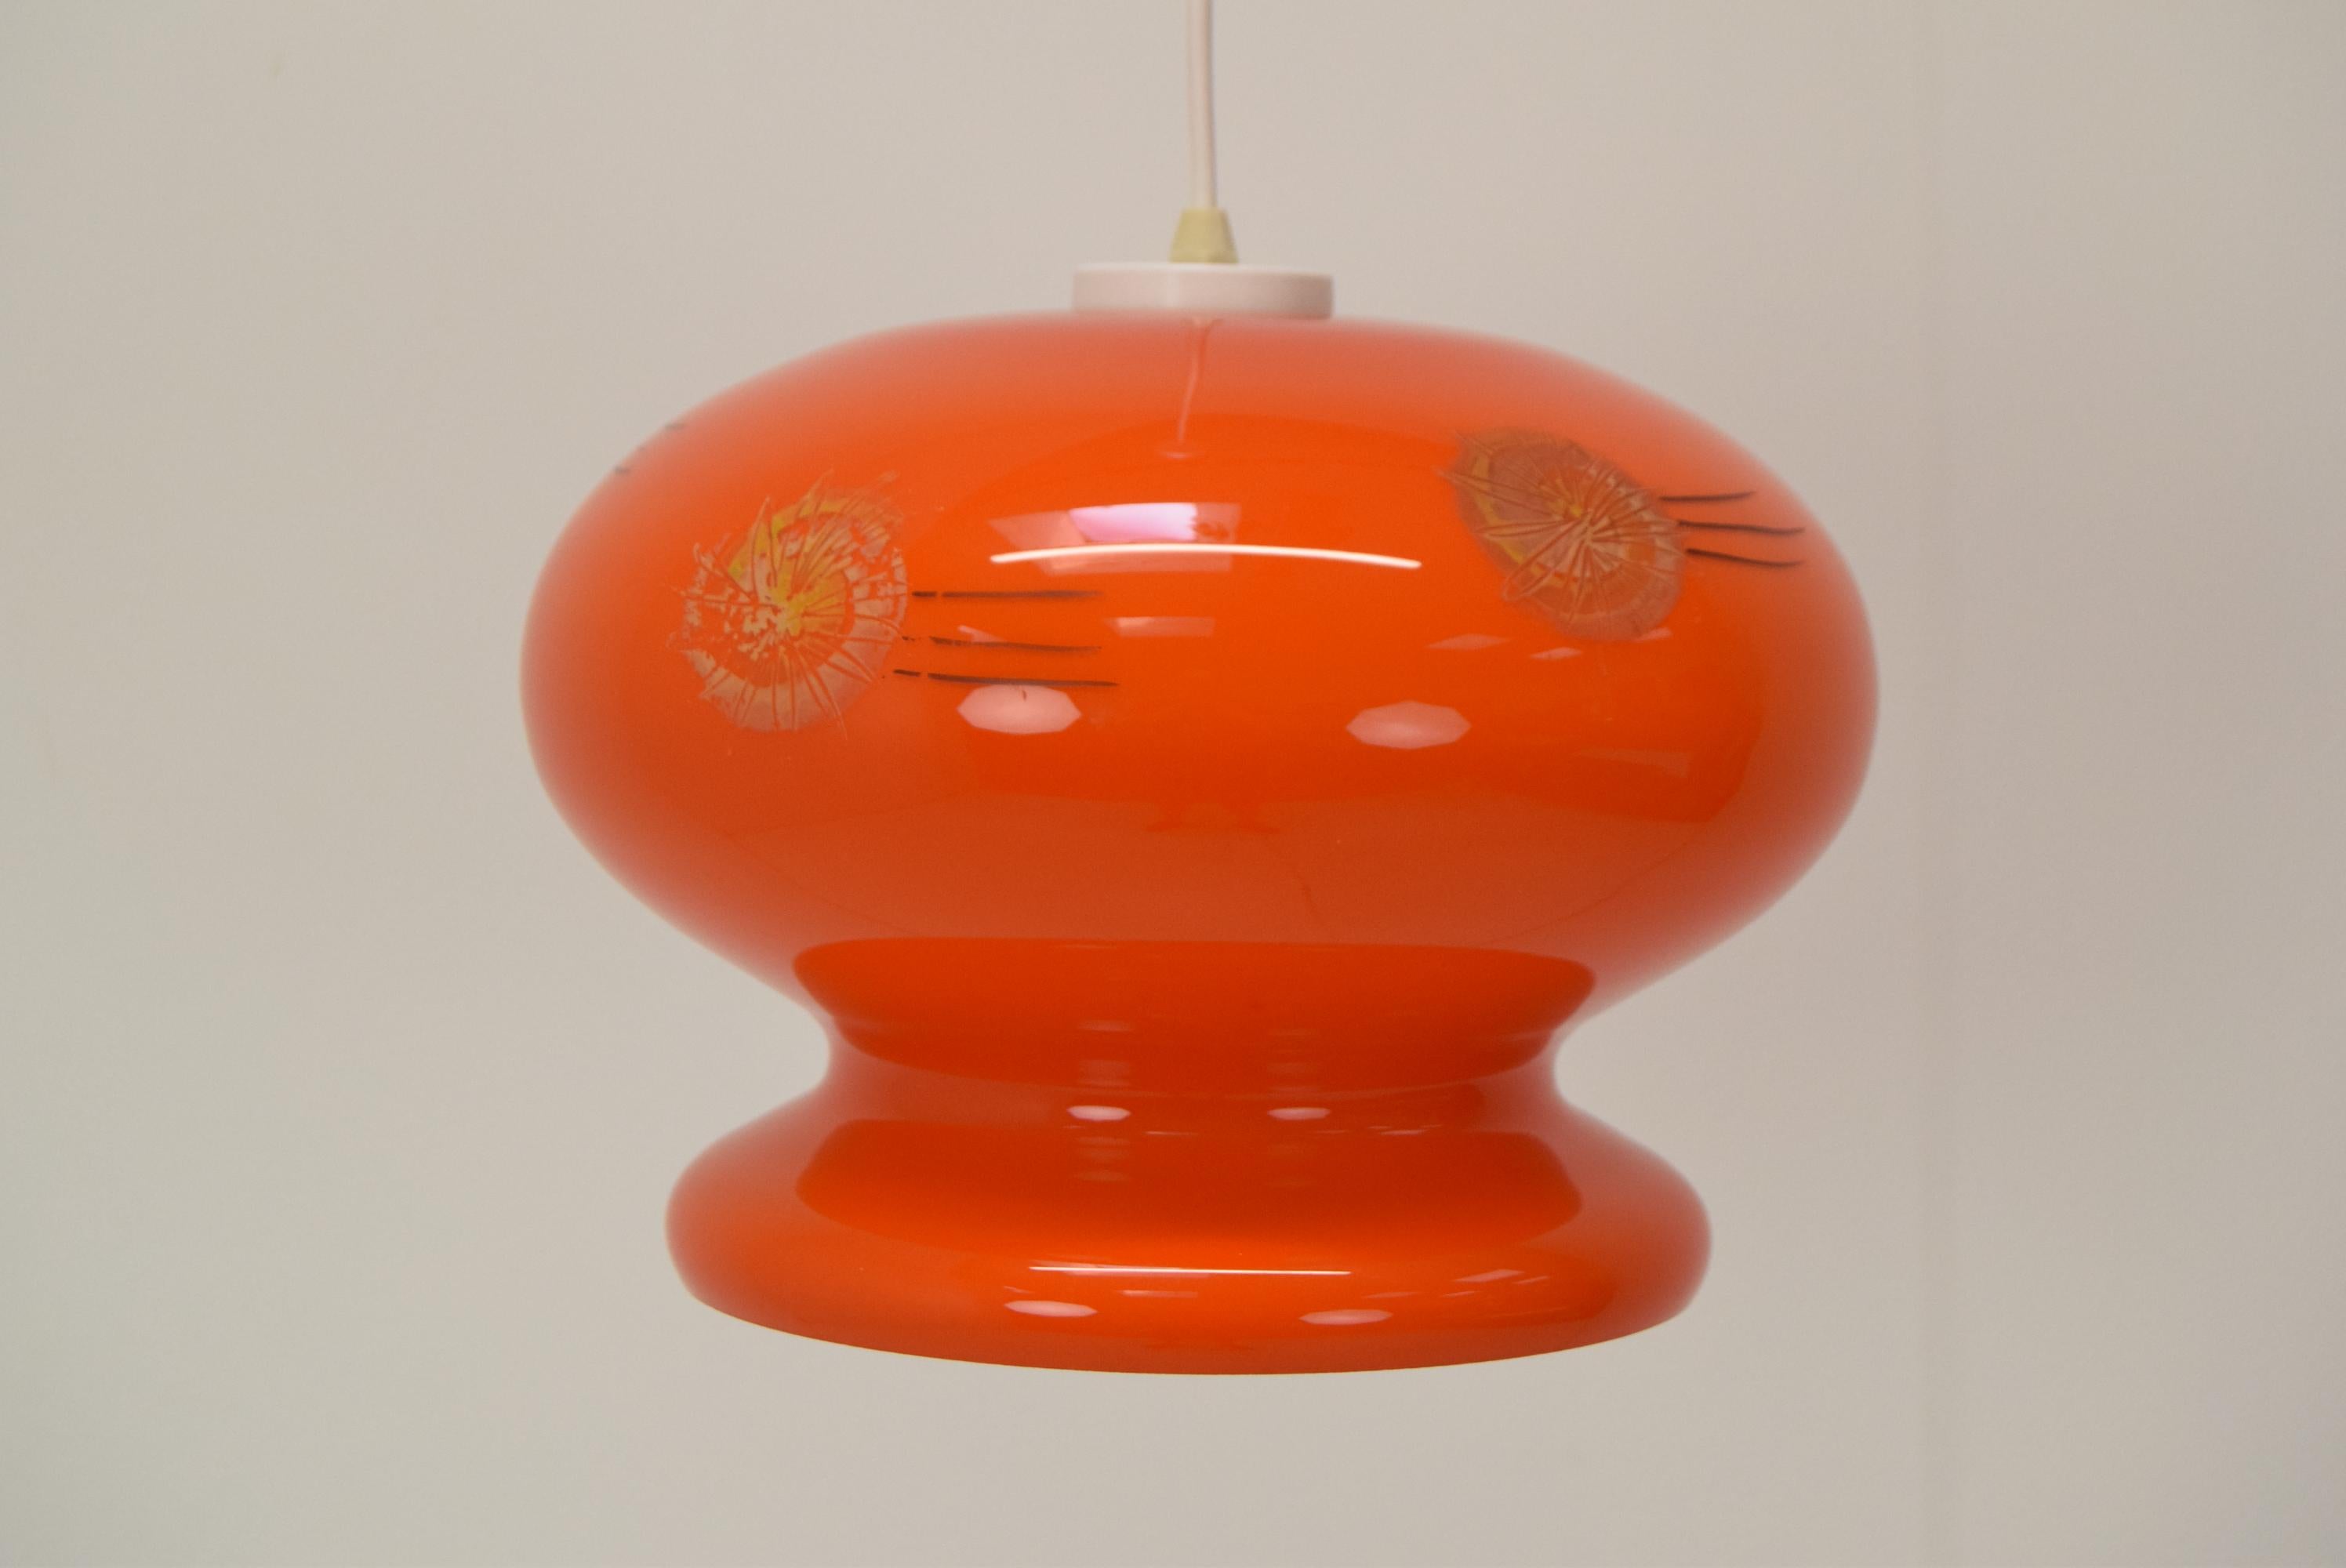 
Made in Czechoslovakia
Made of Glass,Plastic
The pendant is equipped with a new electrical installation
The cable length may be shortened
1xE27 or E26 bulb
US wiring compatible
Good Condition